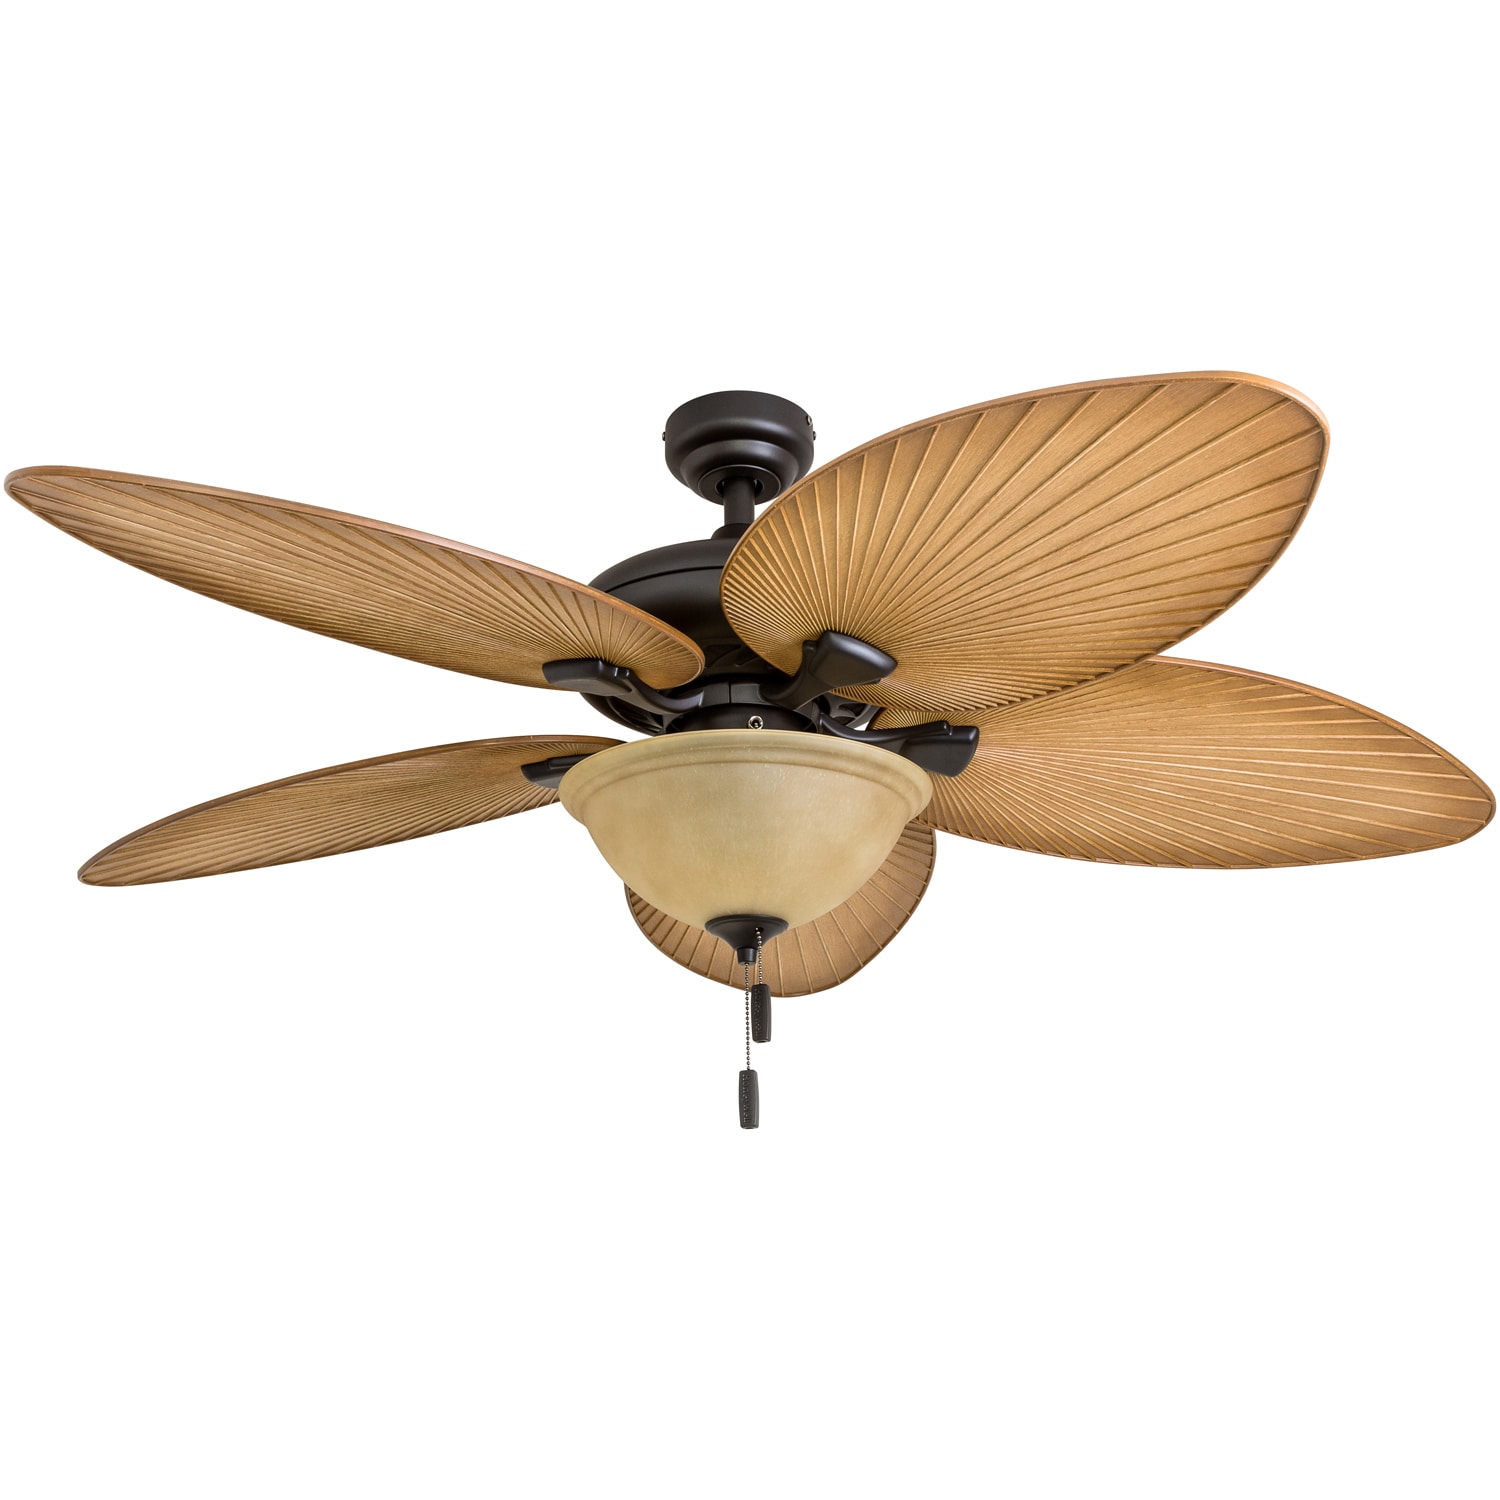 52" Ceiling Fan with Light Kit Indoor Outdoor Downrod Bronze Palm Tropical Blade 